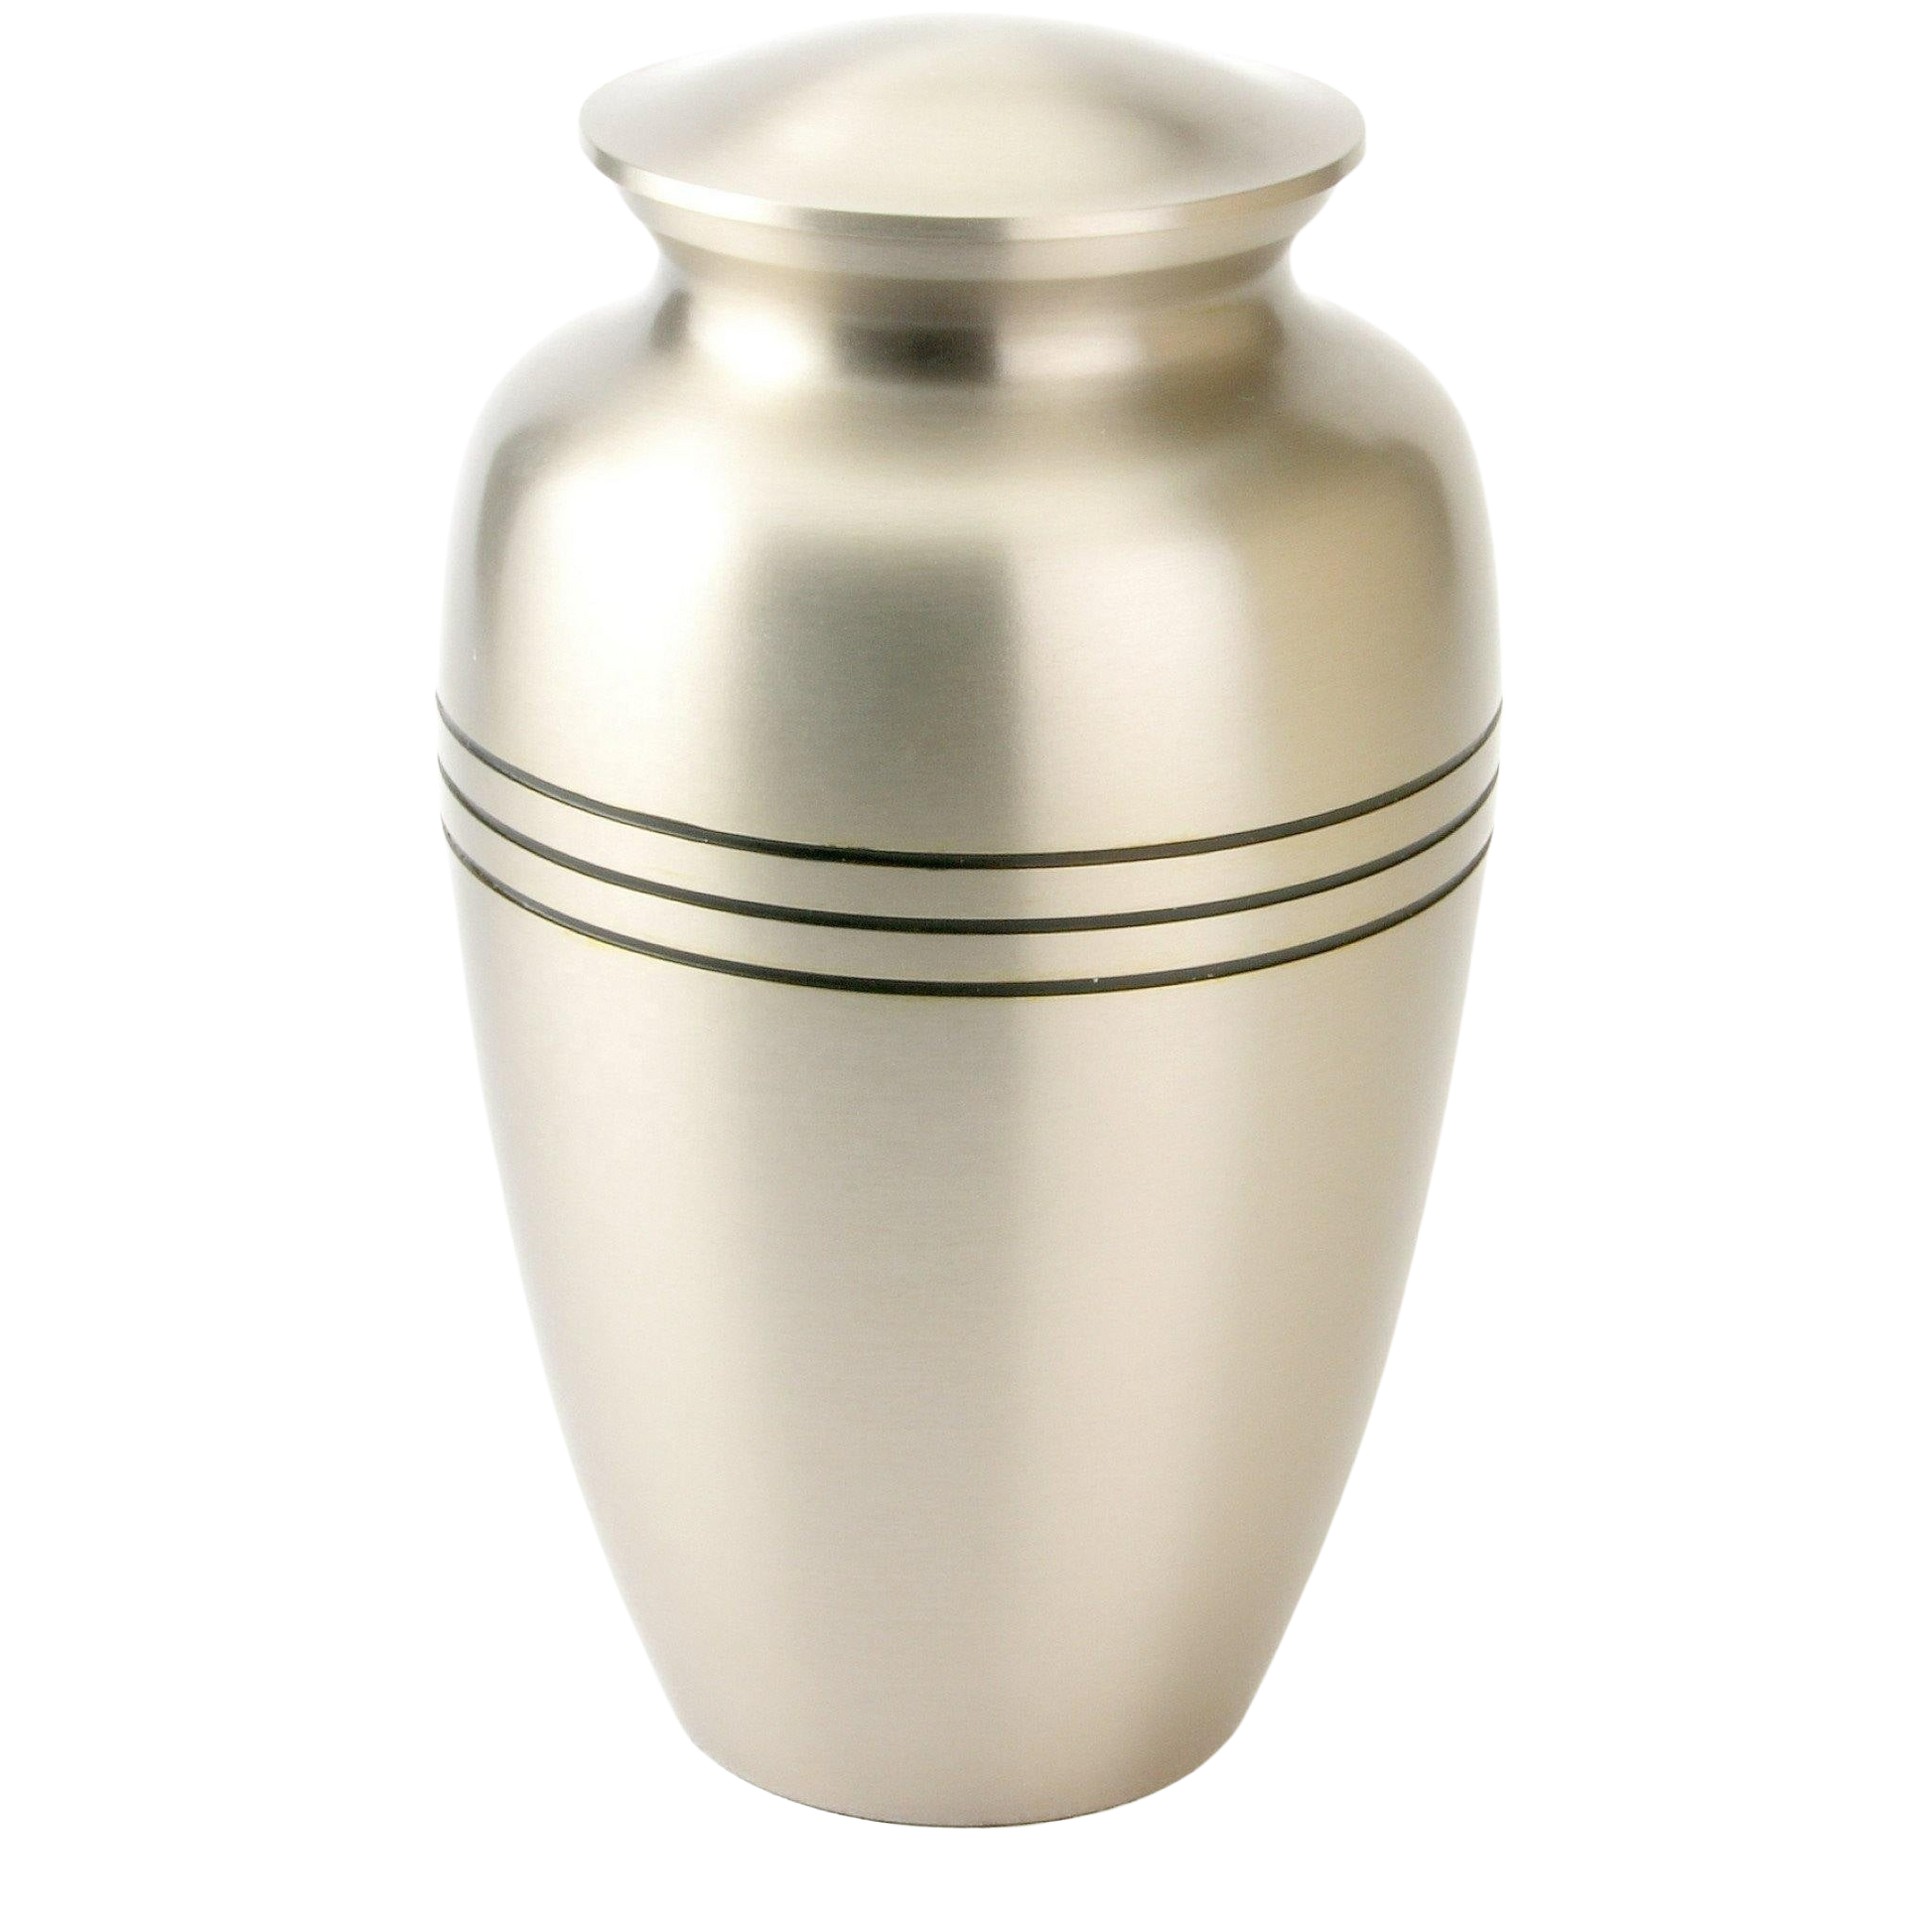 Amor Adult Ashes Urn-Adult Urn for Ashes-Cremation Urns- The cremation urns for ashes and keepsakes for ashes come in a variety of styles to suit most tastes, decor and different volumes of funeral ashes.